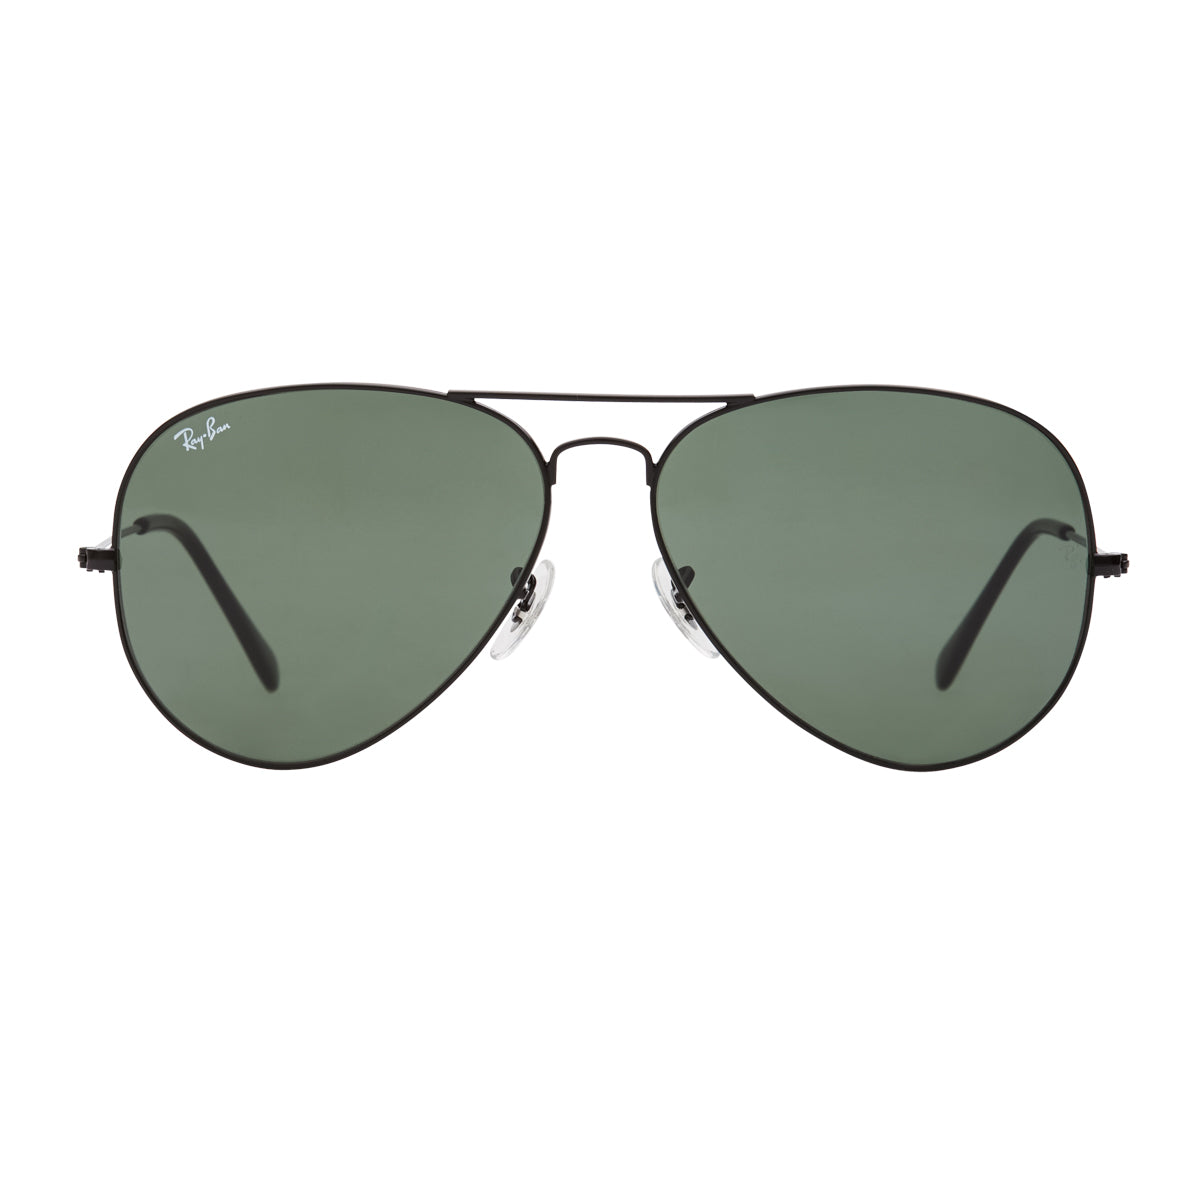 Ray-Ban Aviator RB3026 Large Sunglasses - Black/Green Front